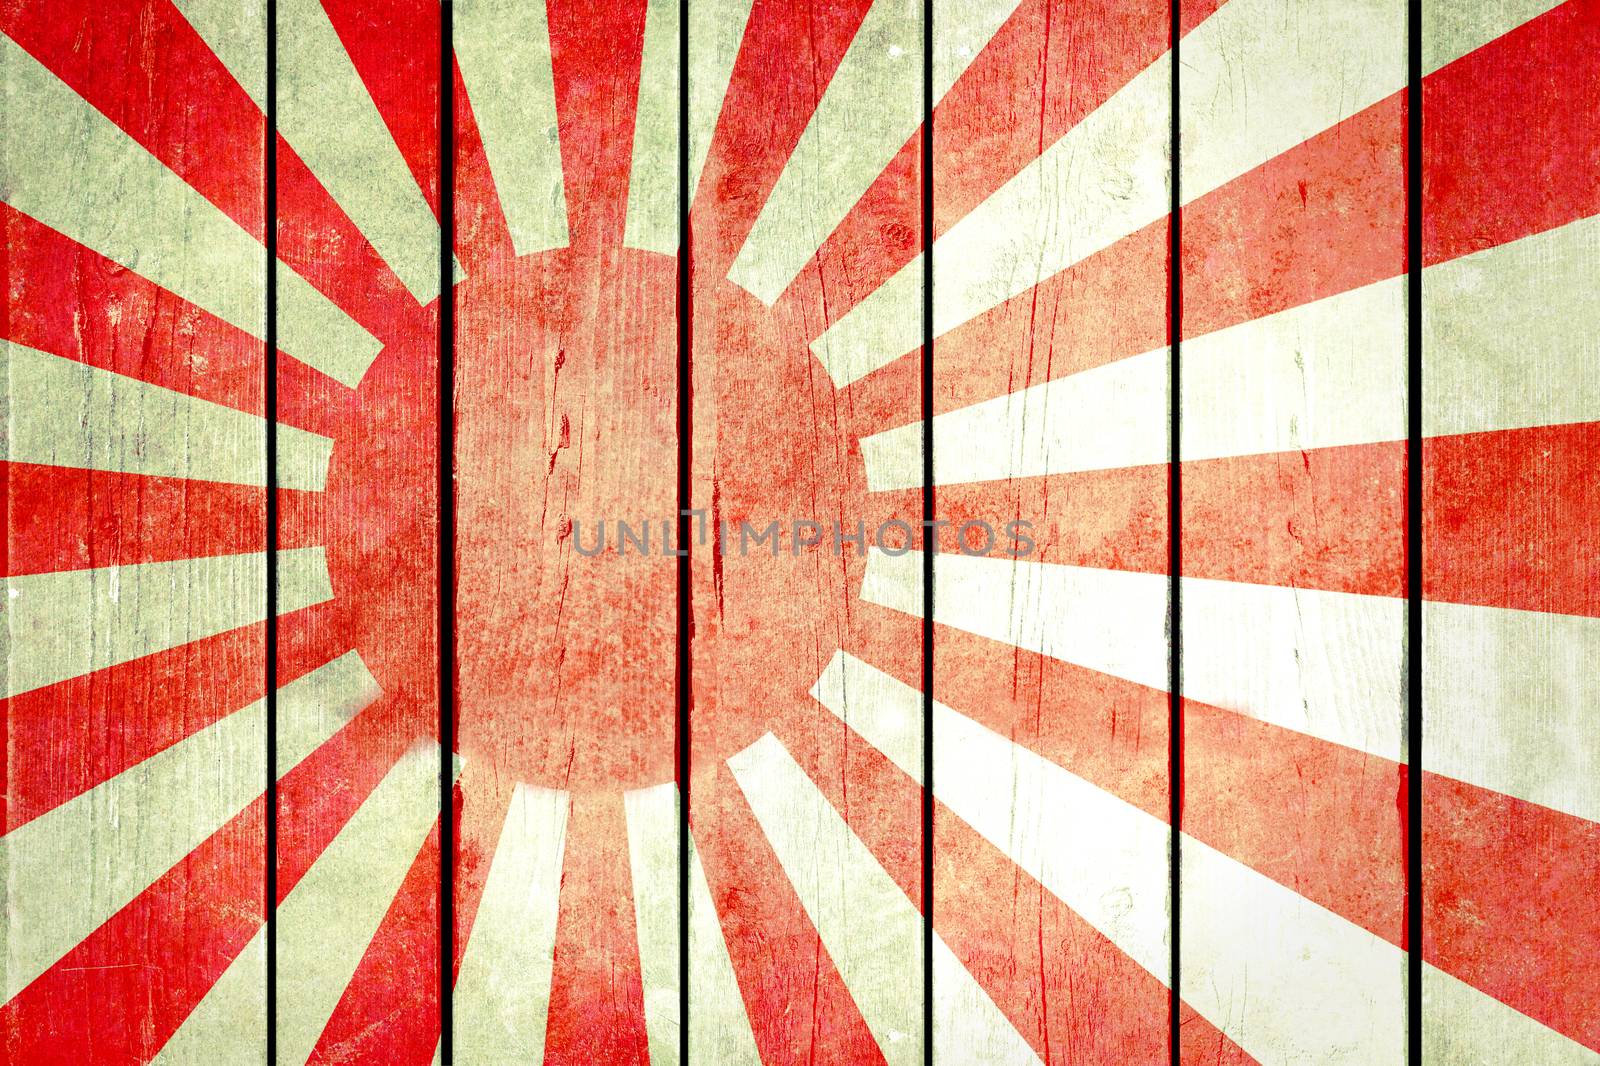 Imperial Japan wooden grunge flag. Imperial Japan flag painted on the old wooden planks. Vintage retro picture from my collection of flags.